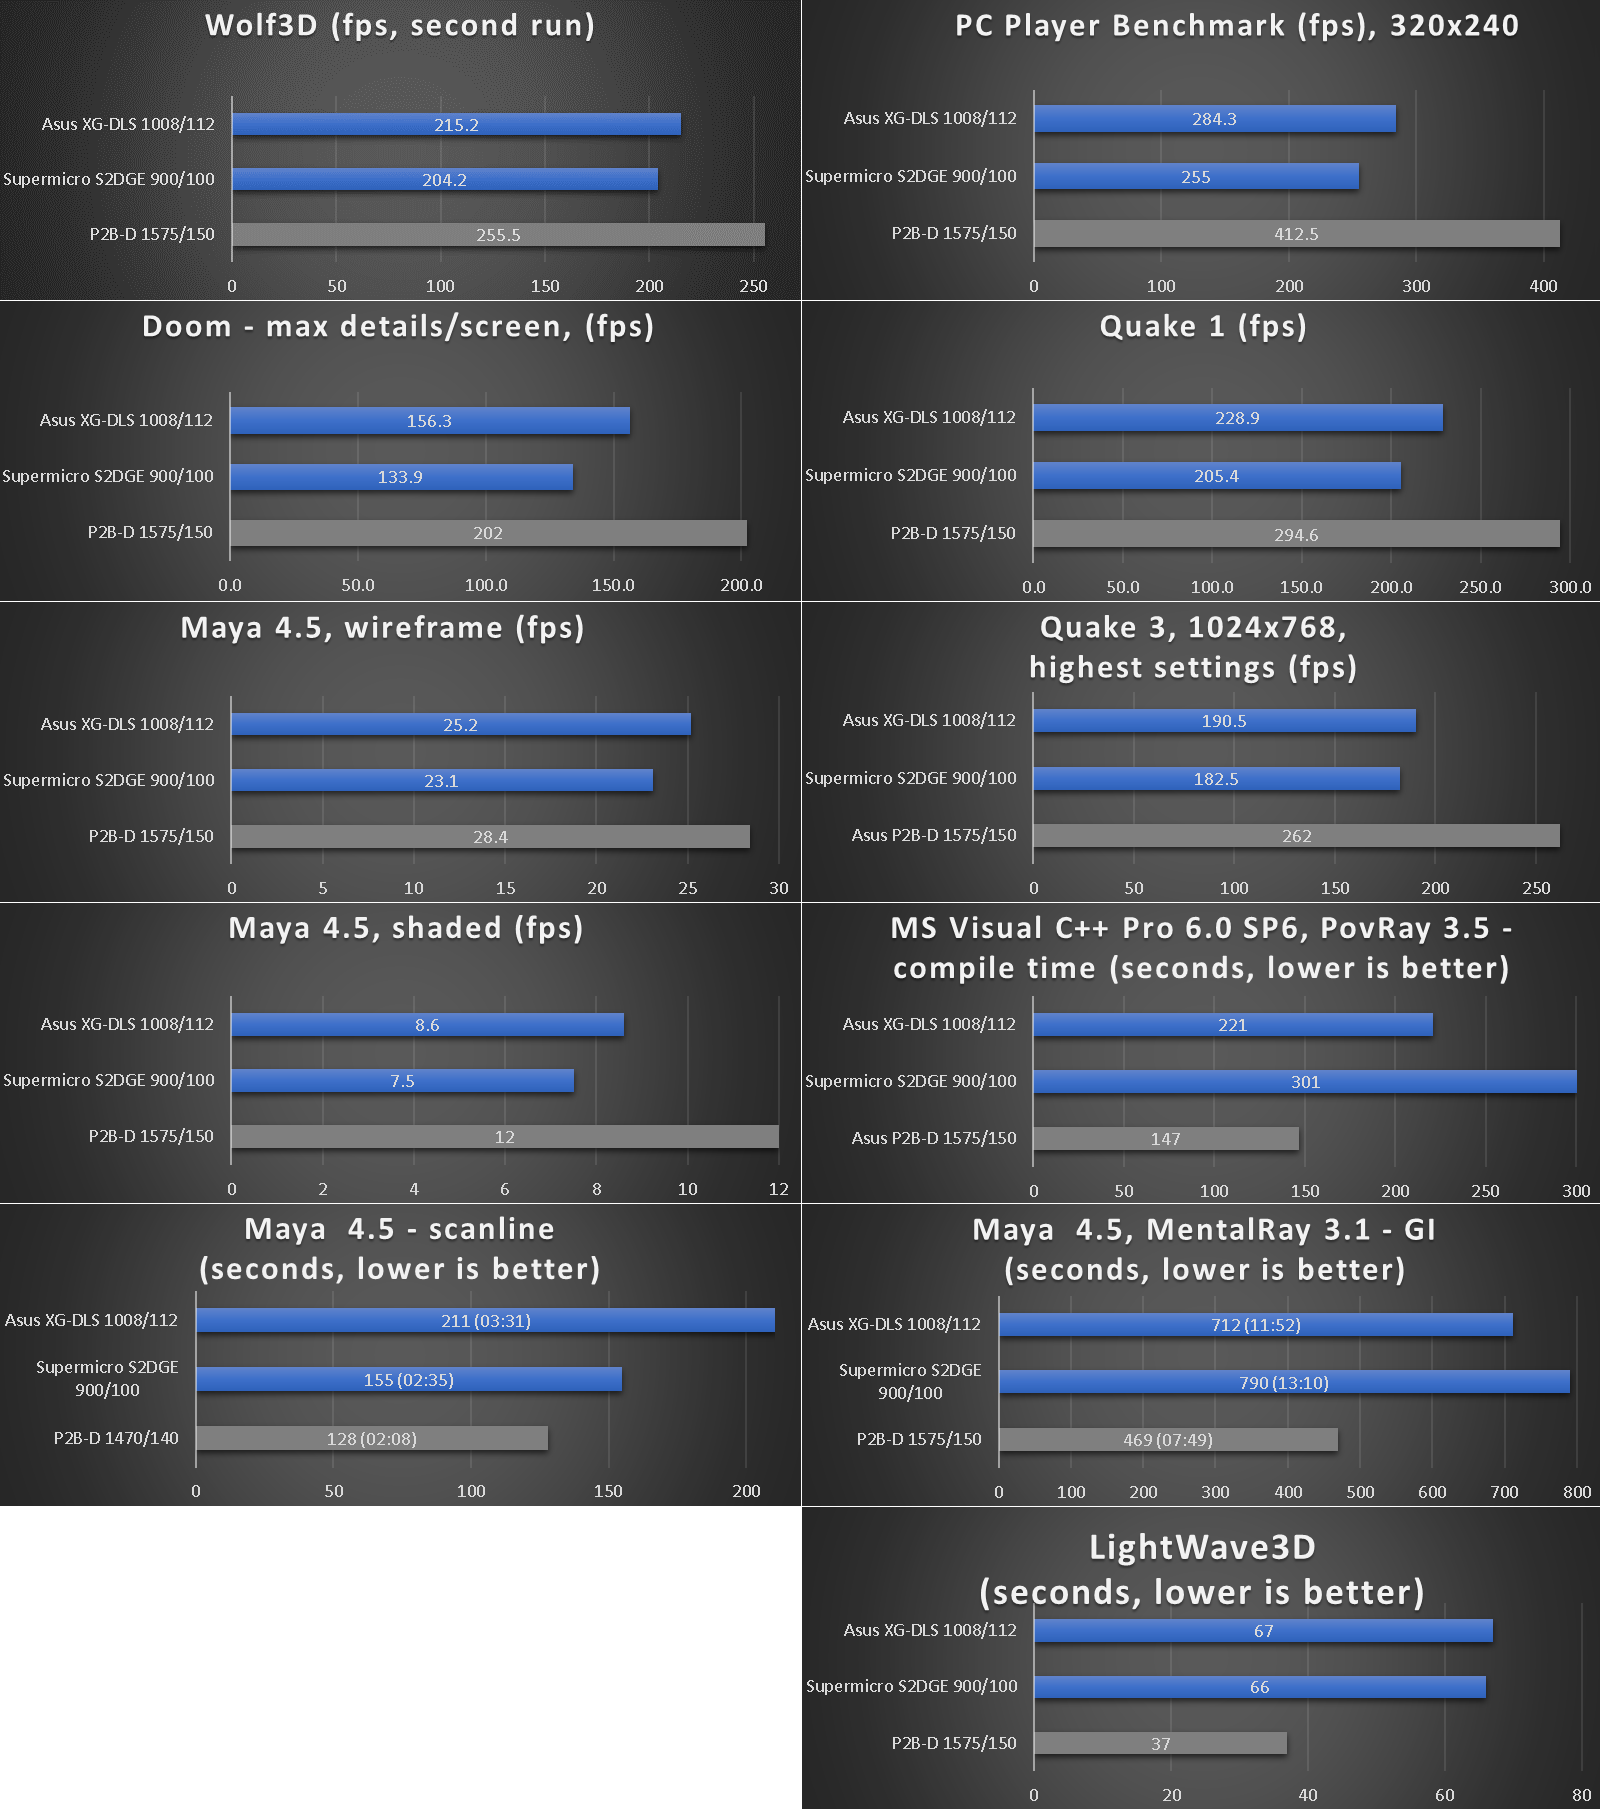 benchmarks_asus_xg-dls.png